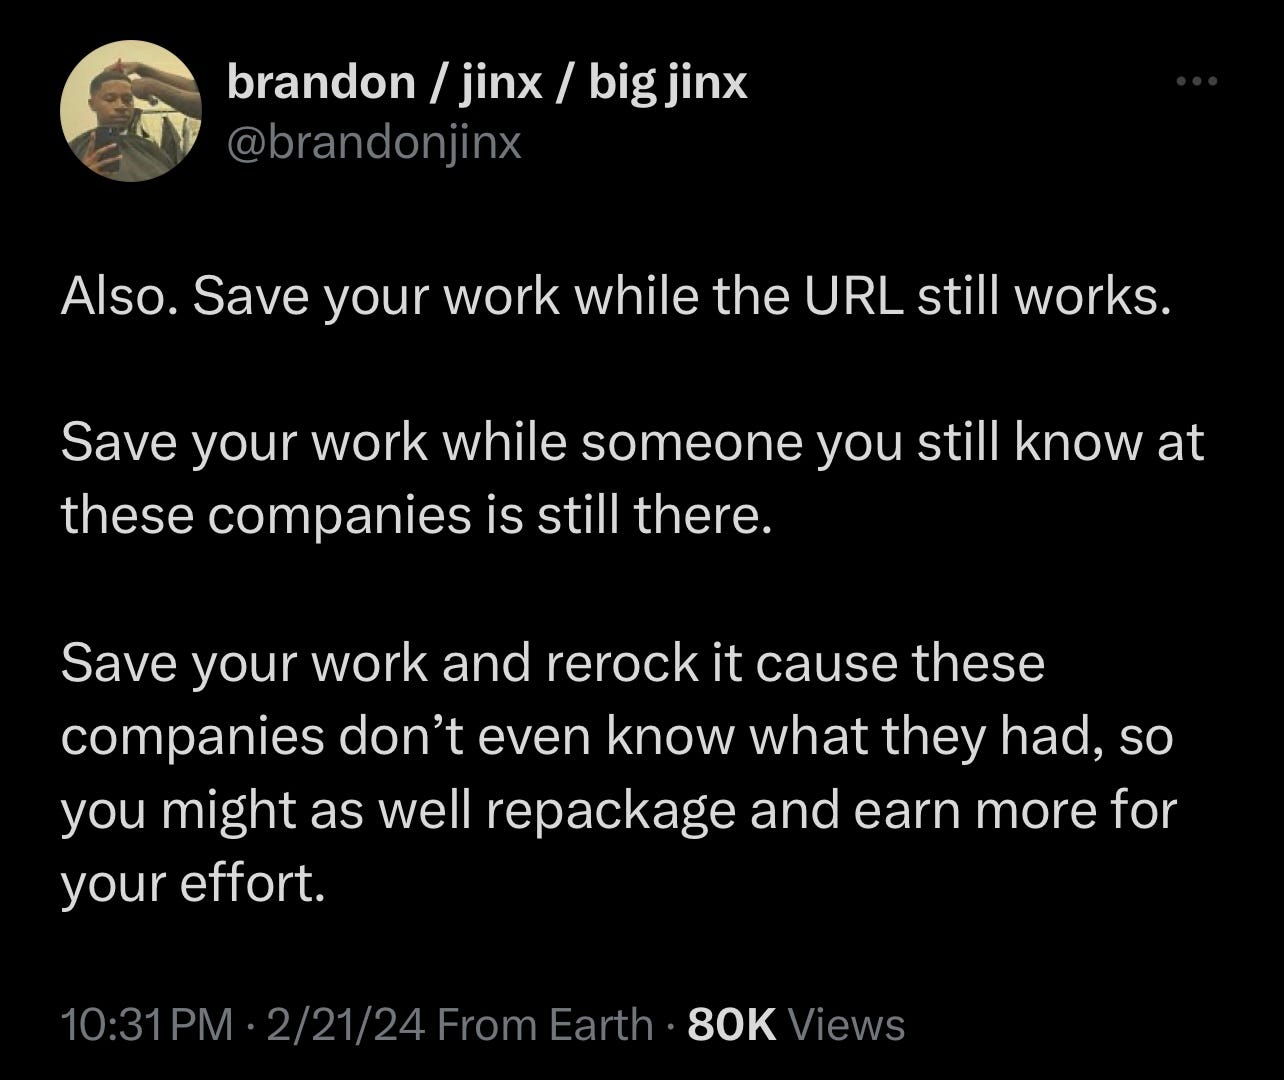 brandon / jinx / bigjinx @brandonjinx Also. Save your work while the URL still works. Save your work while someone you still know at these companies is still there. Save your work and rerock it cause these companies don't even know what they had, so you might as well repackage and earn more for your effort.